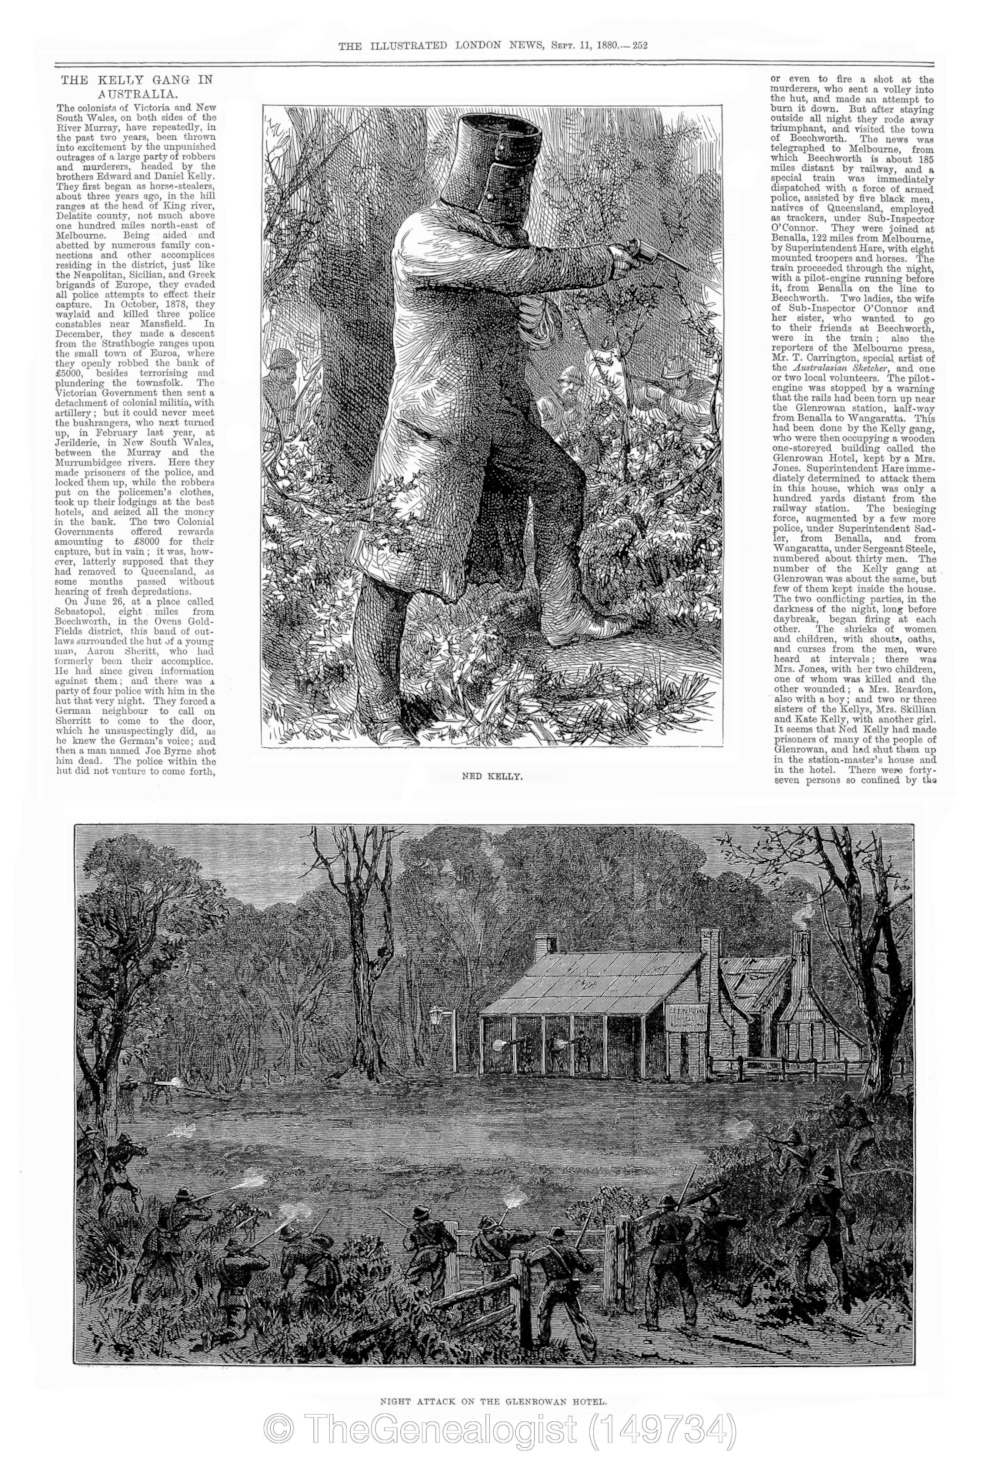 The Illustrated London News 11 September 1880, recounts the final stand of the bushranger